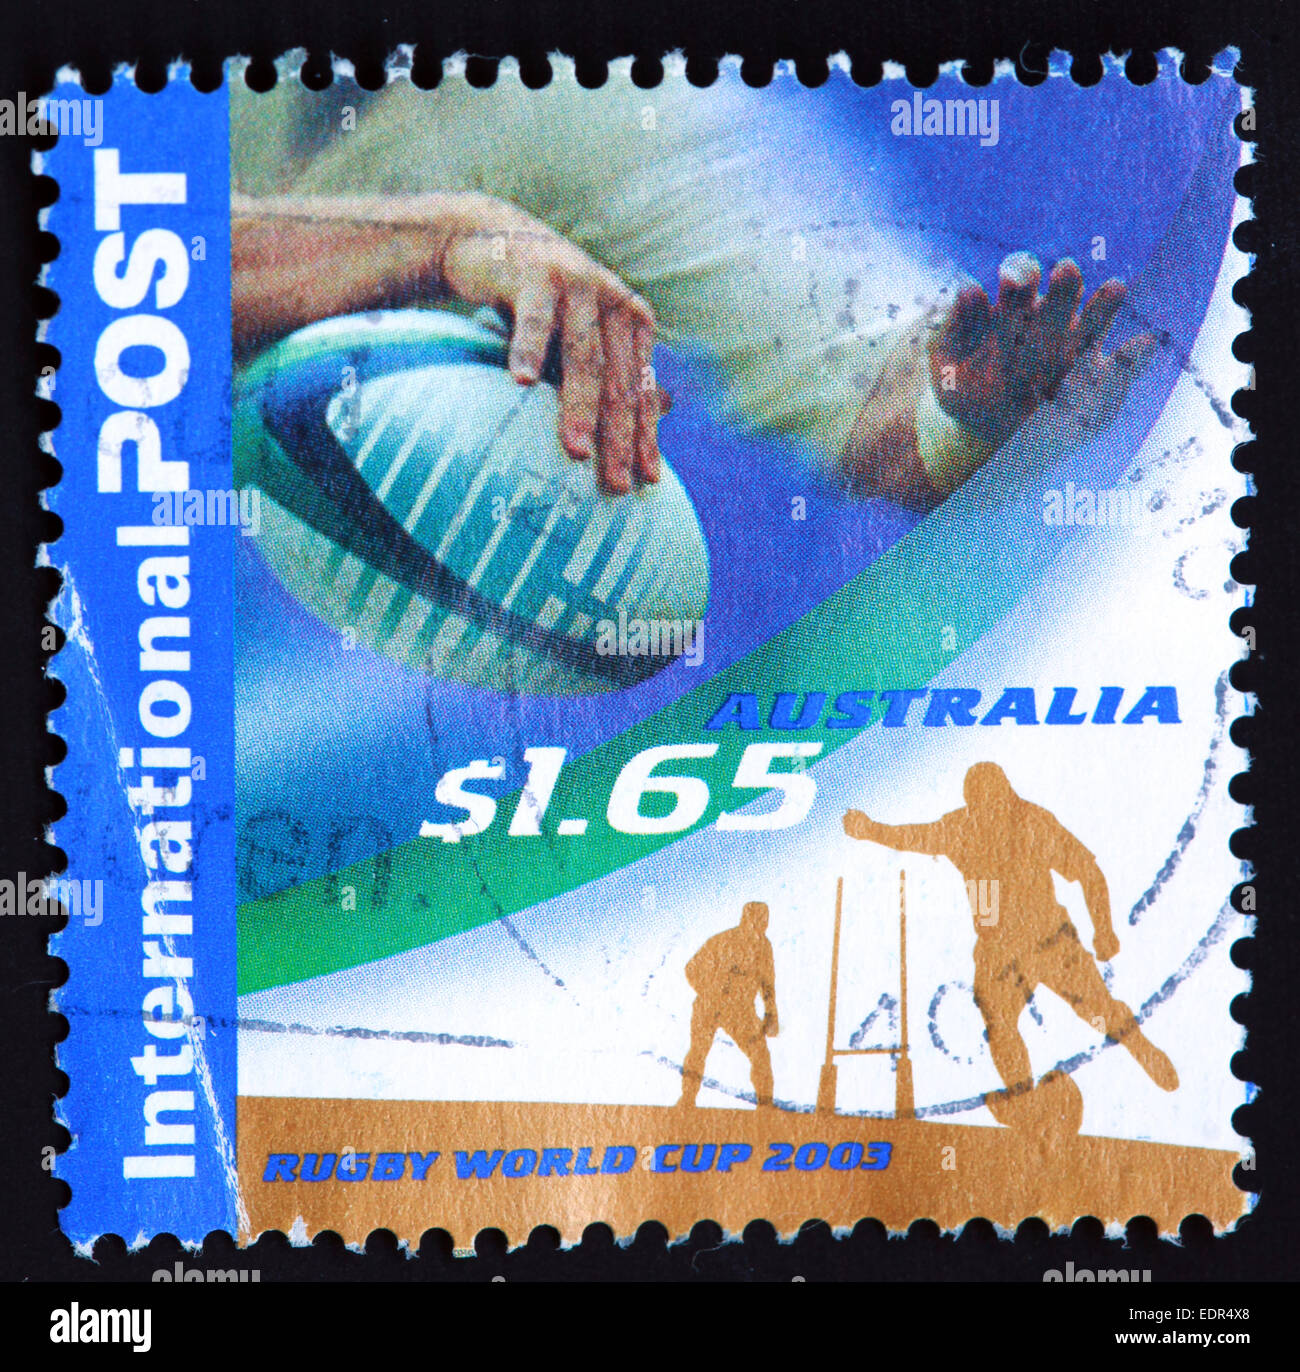 Used and postmarked Australia / Austrailian Stamp $1.65 2003 Rugby World Cup Stock Photo